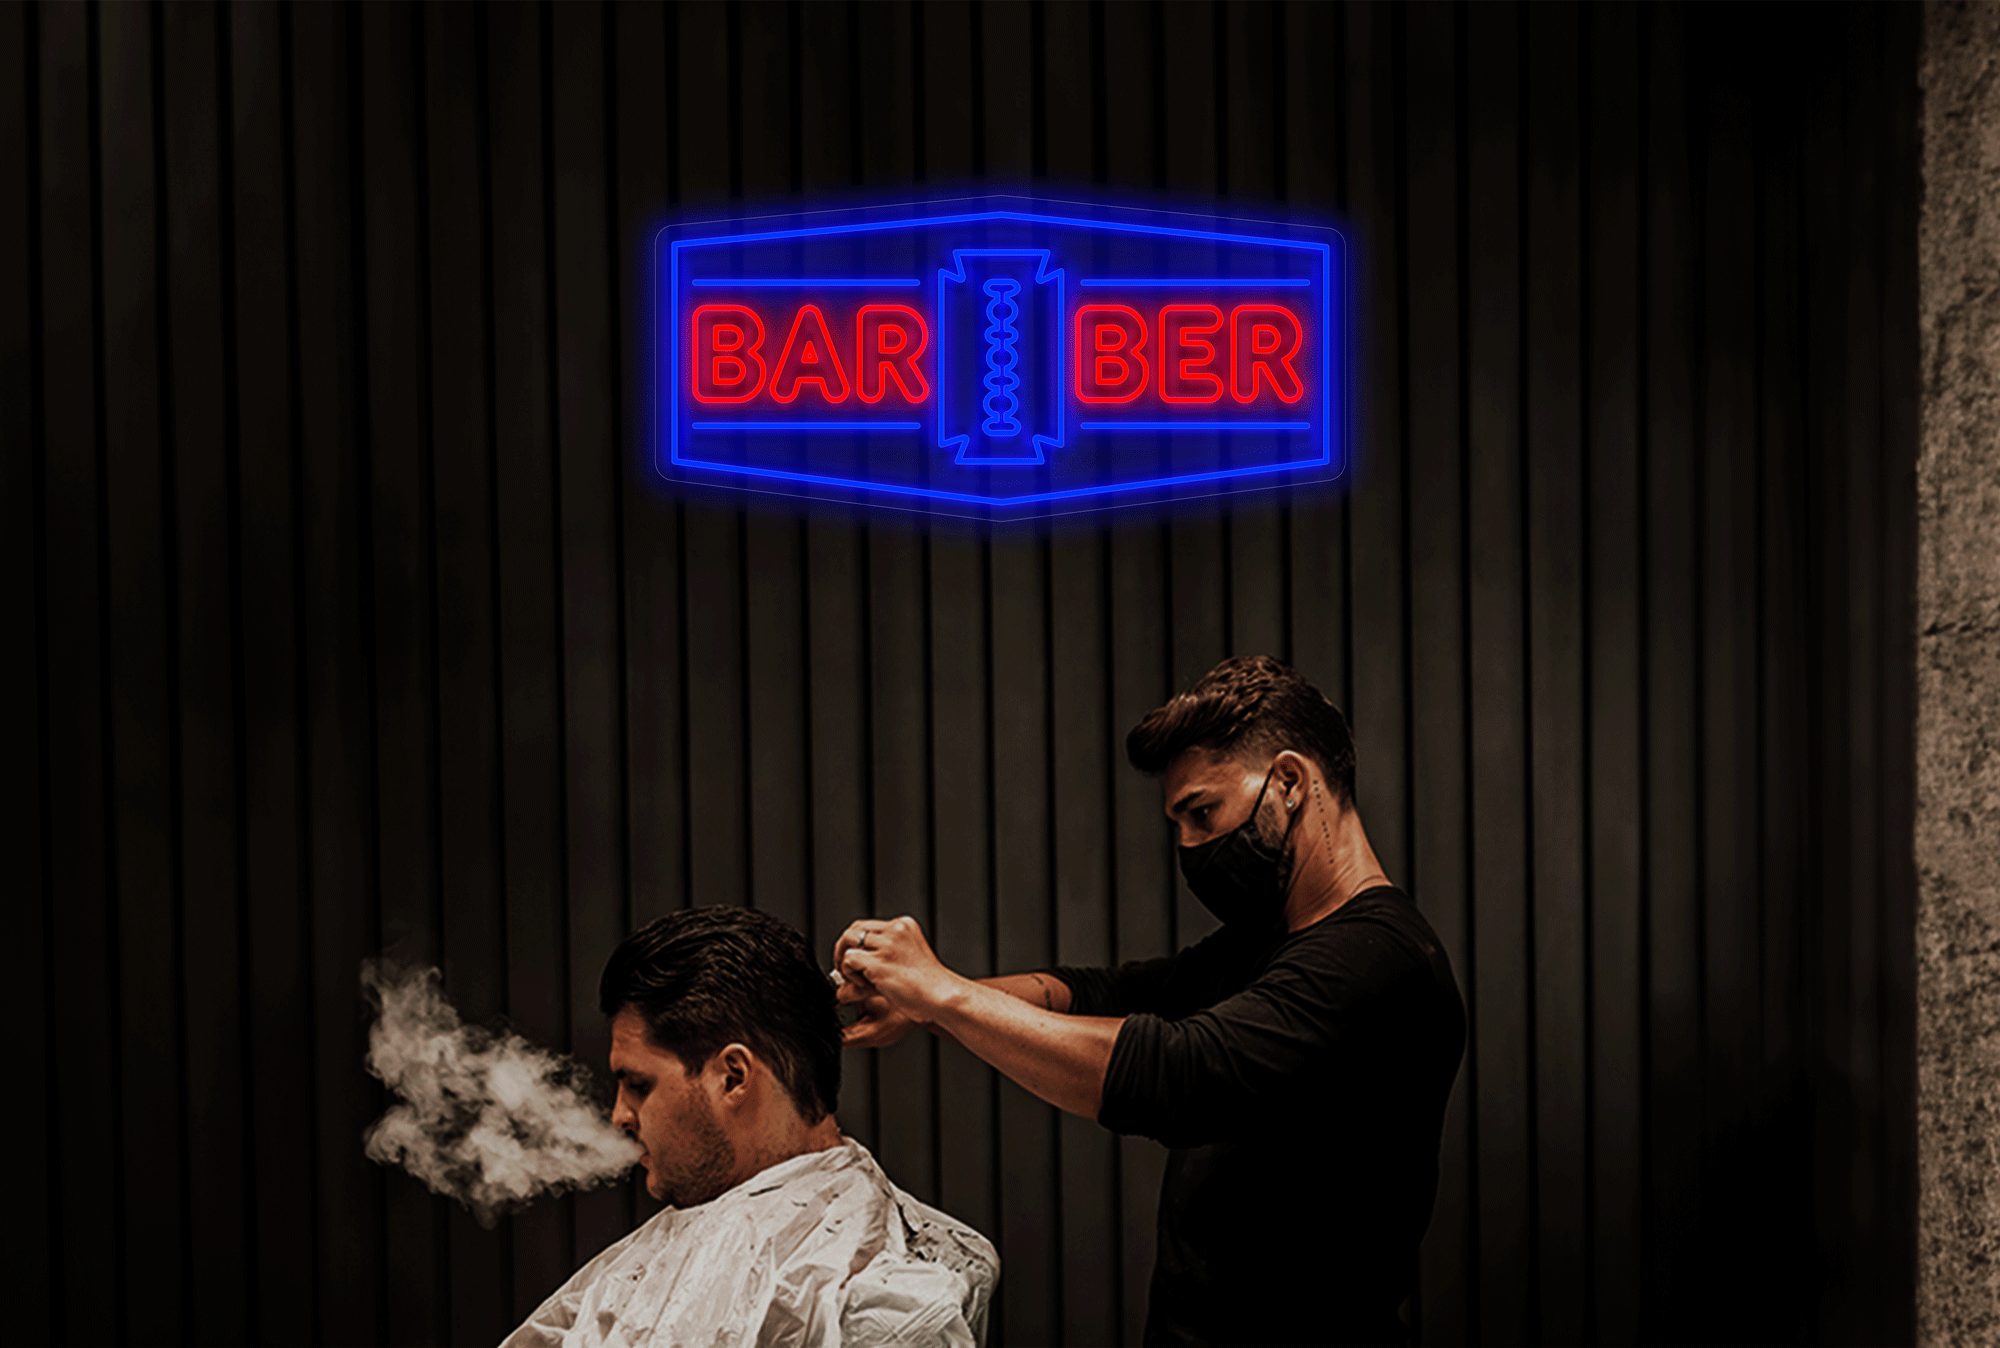 "Barber" with Border and Blade Logo LED Neon Sign